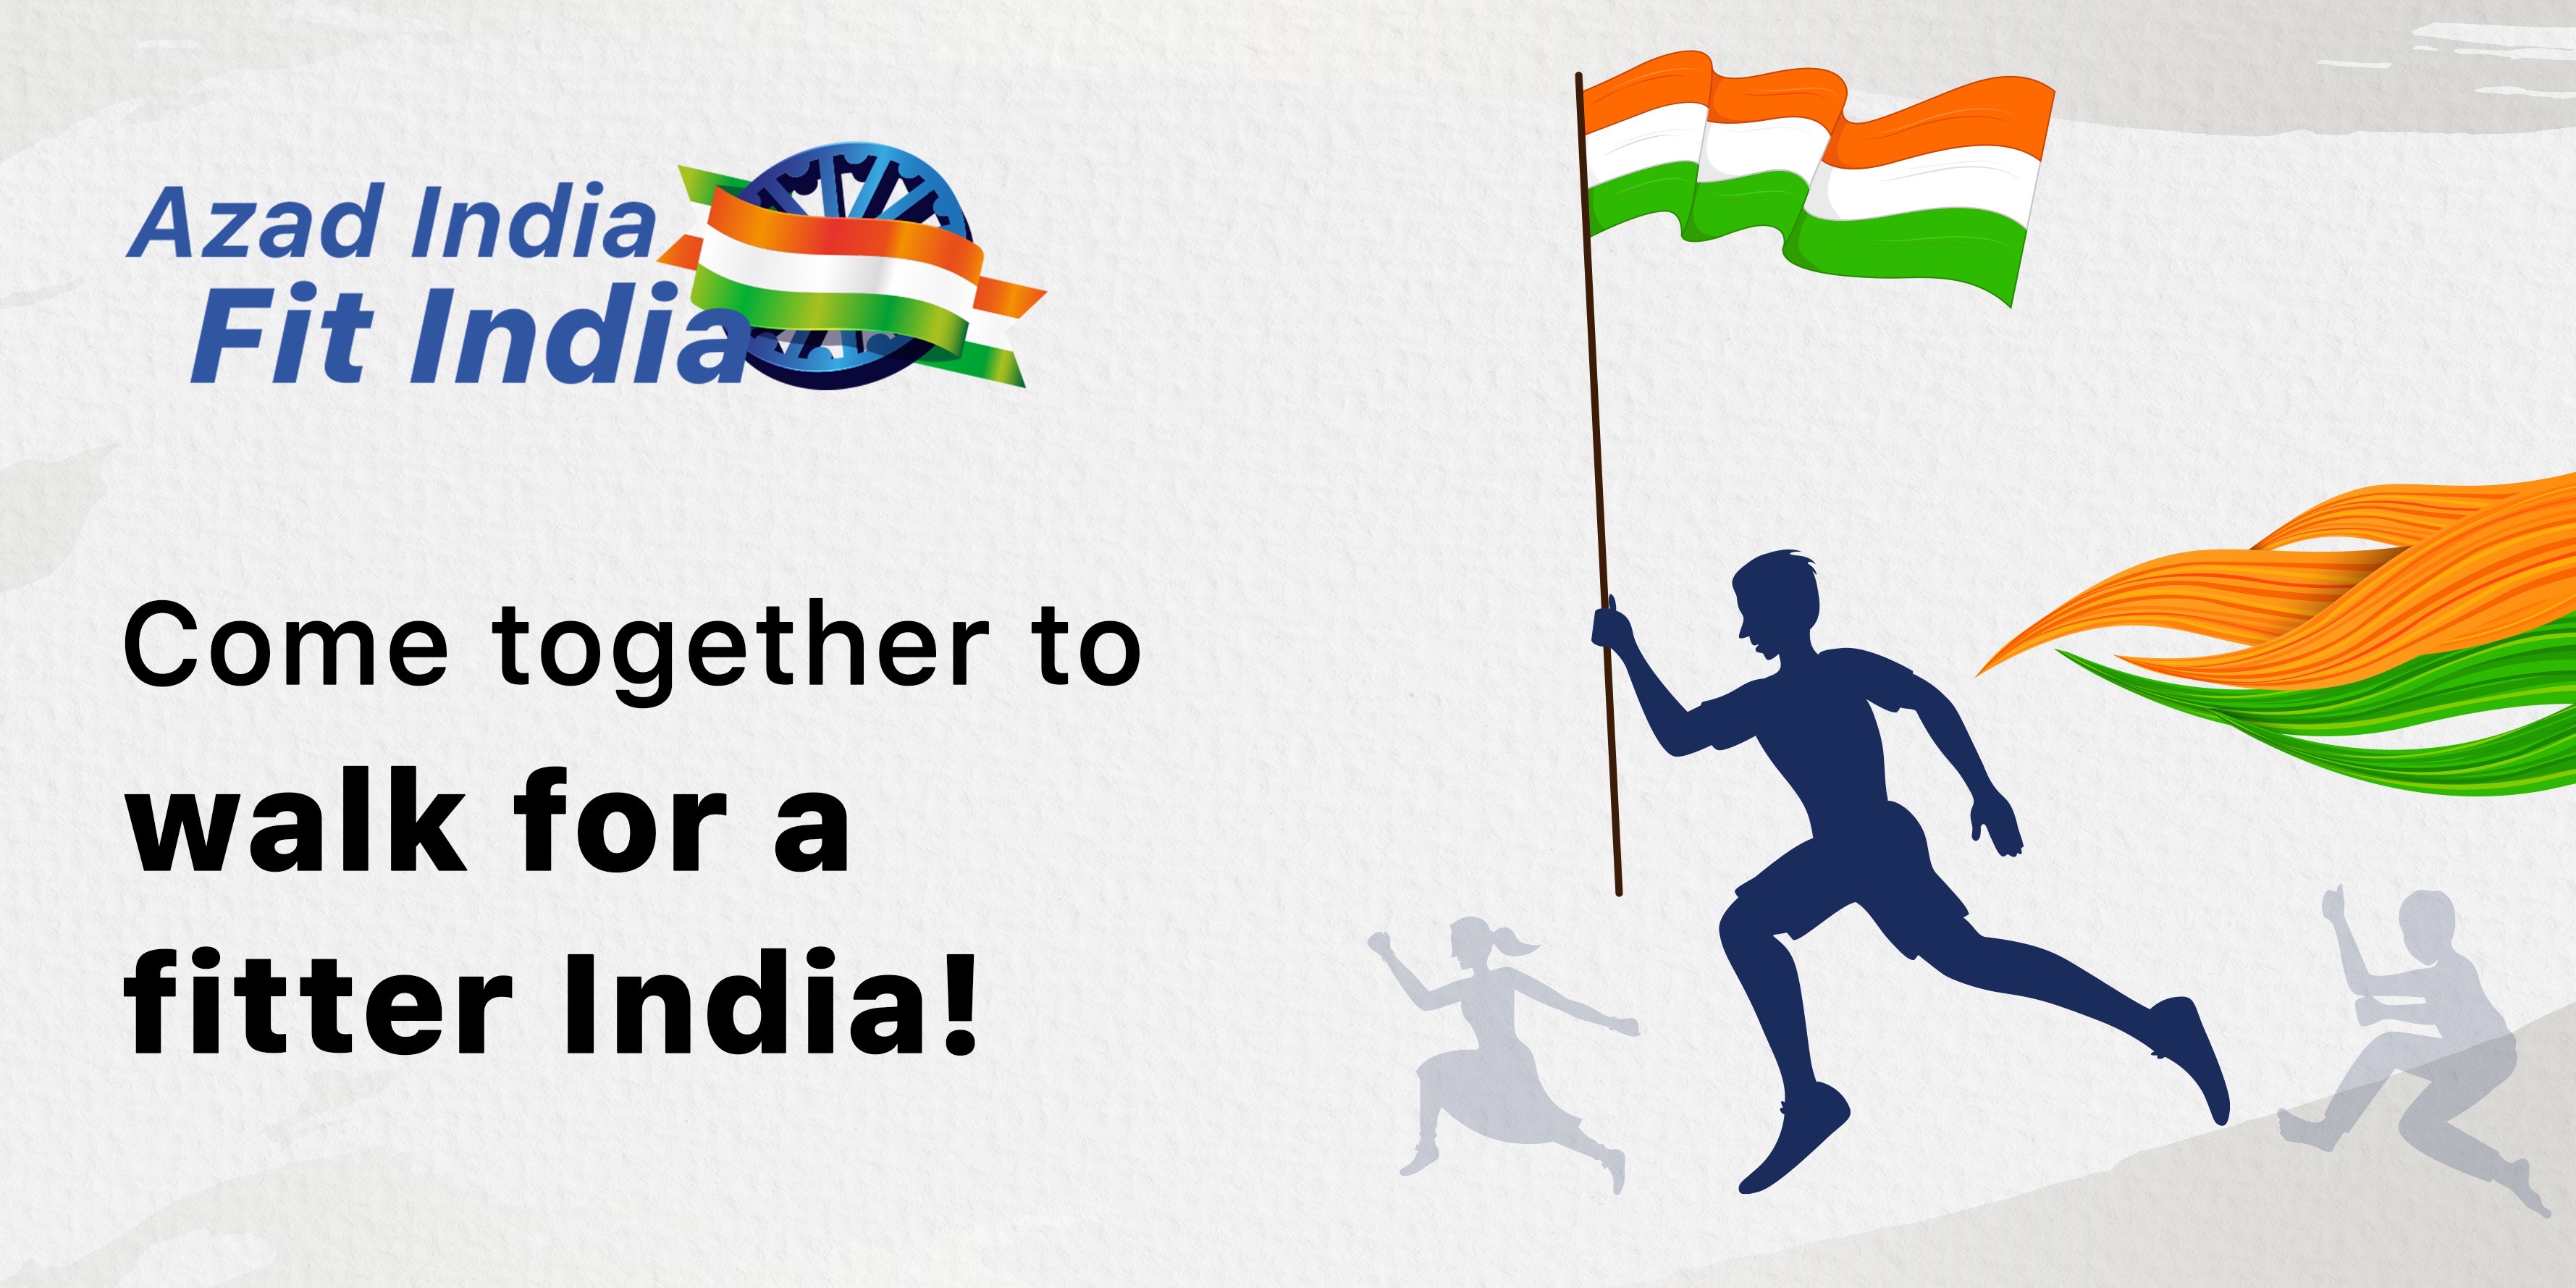 SSG pledges to make India Healthier and Fitter, announces fitness campaign “Azad India Fit India”